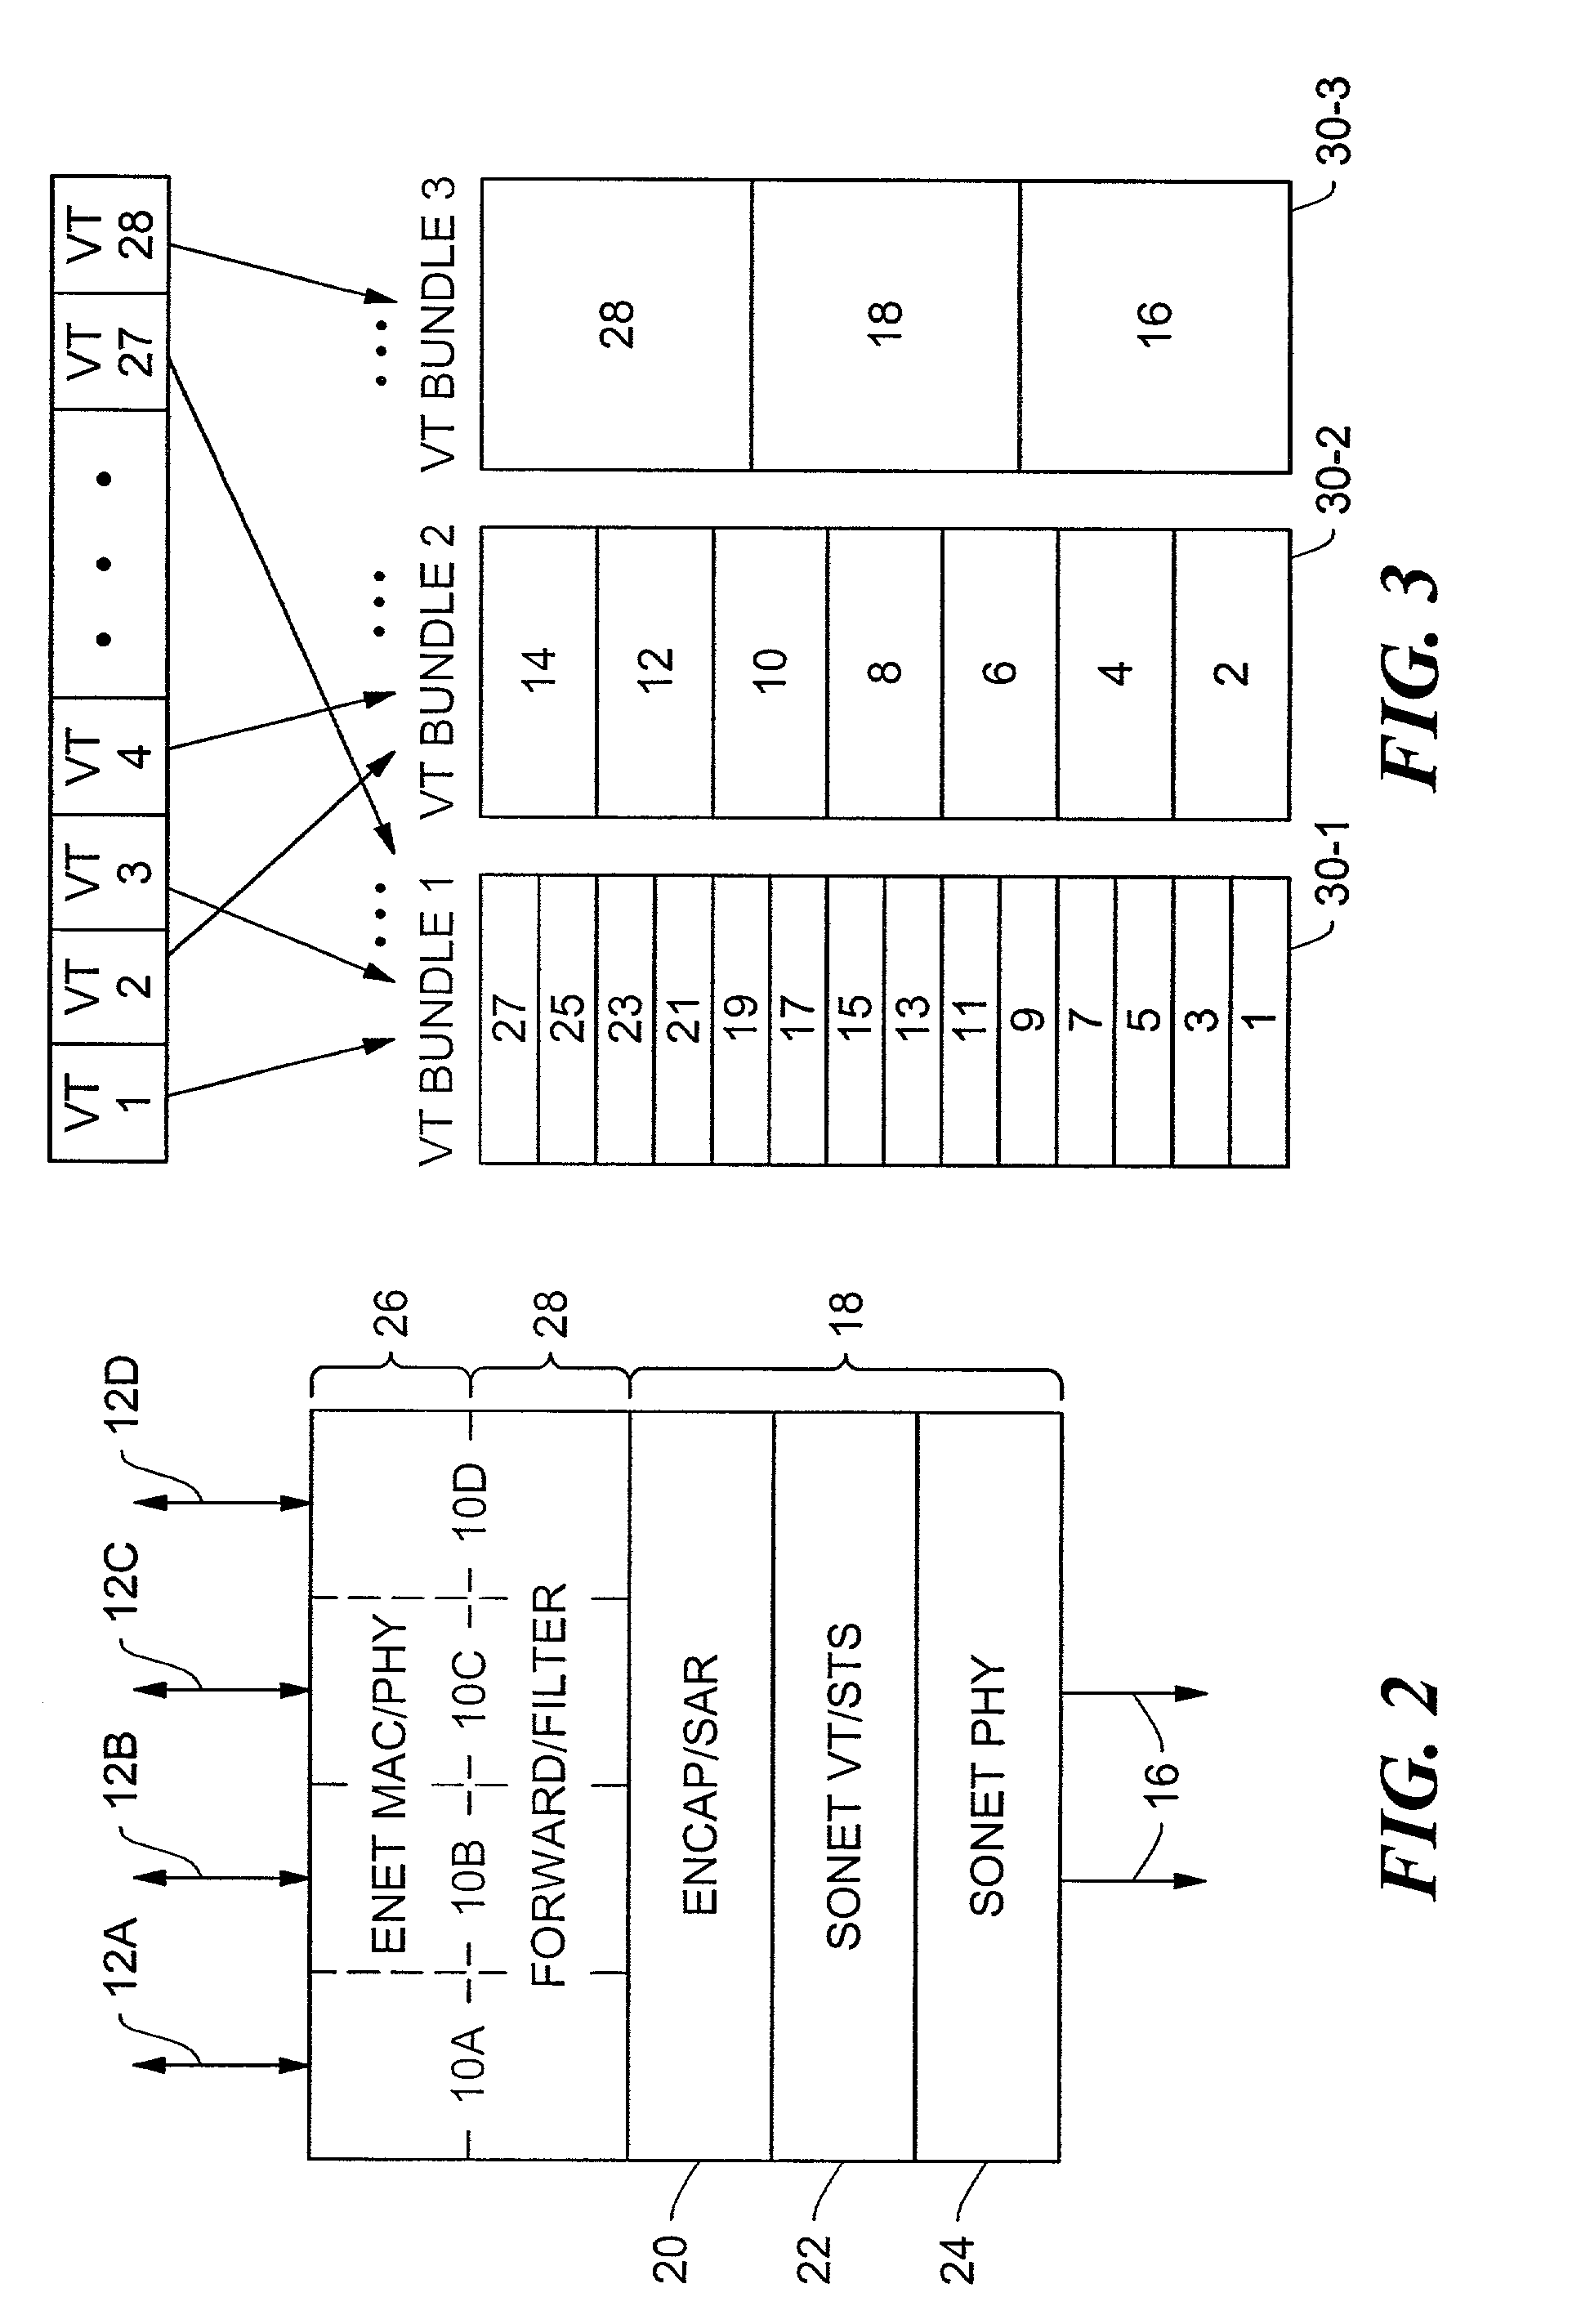 Transmission of data frames using low-overhead encapsulation and multiple virtual tributaries in a synchronous optical network